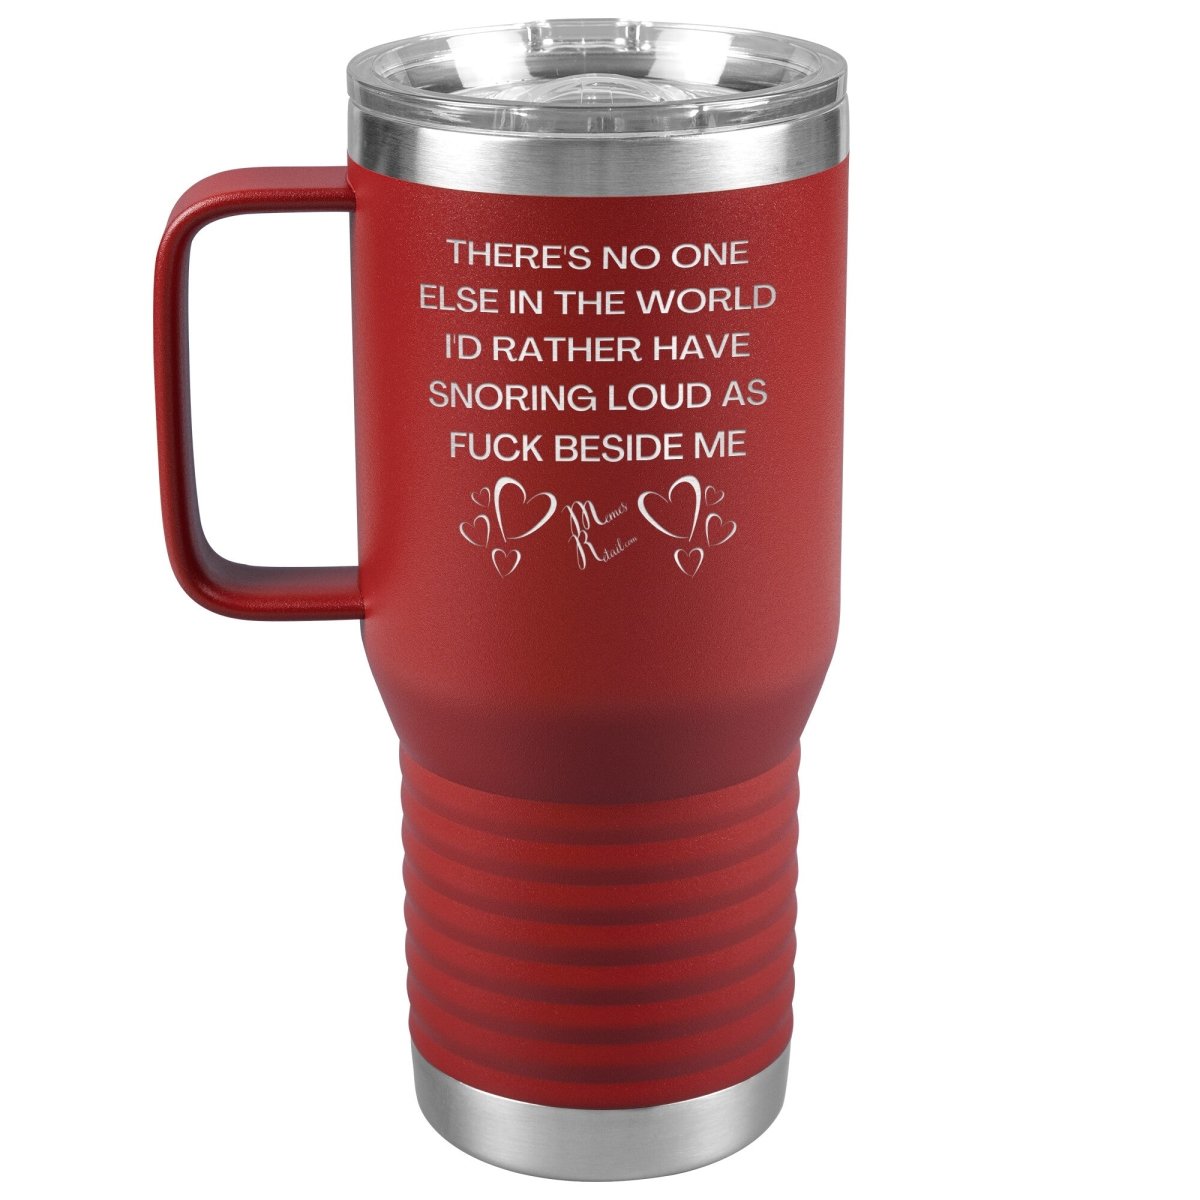 There's No One Else in the World I'd Rather Have Snoring Loud, 20oz Travel Tumbler / Red - MemesRetail.com